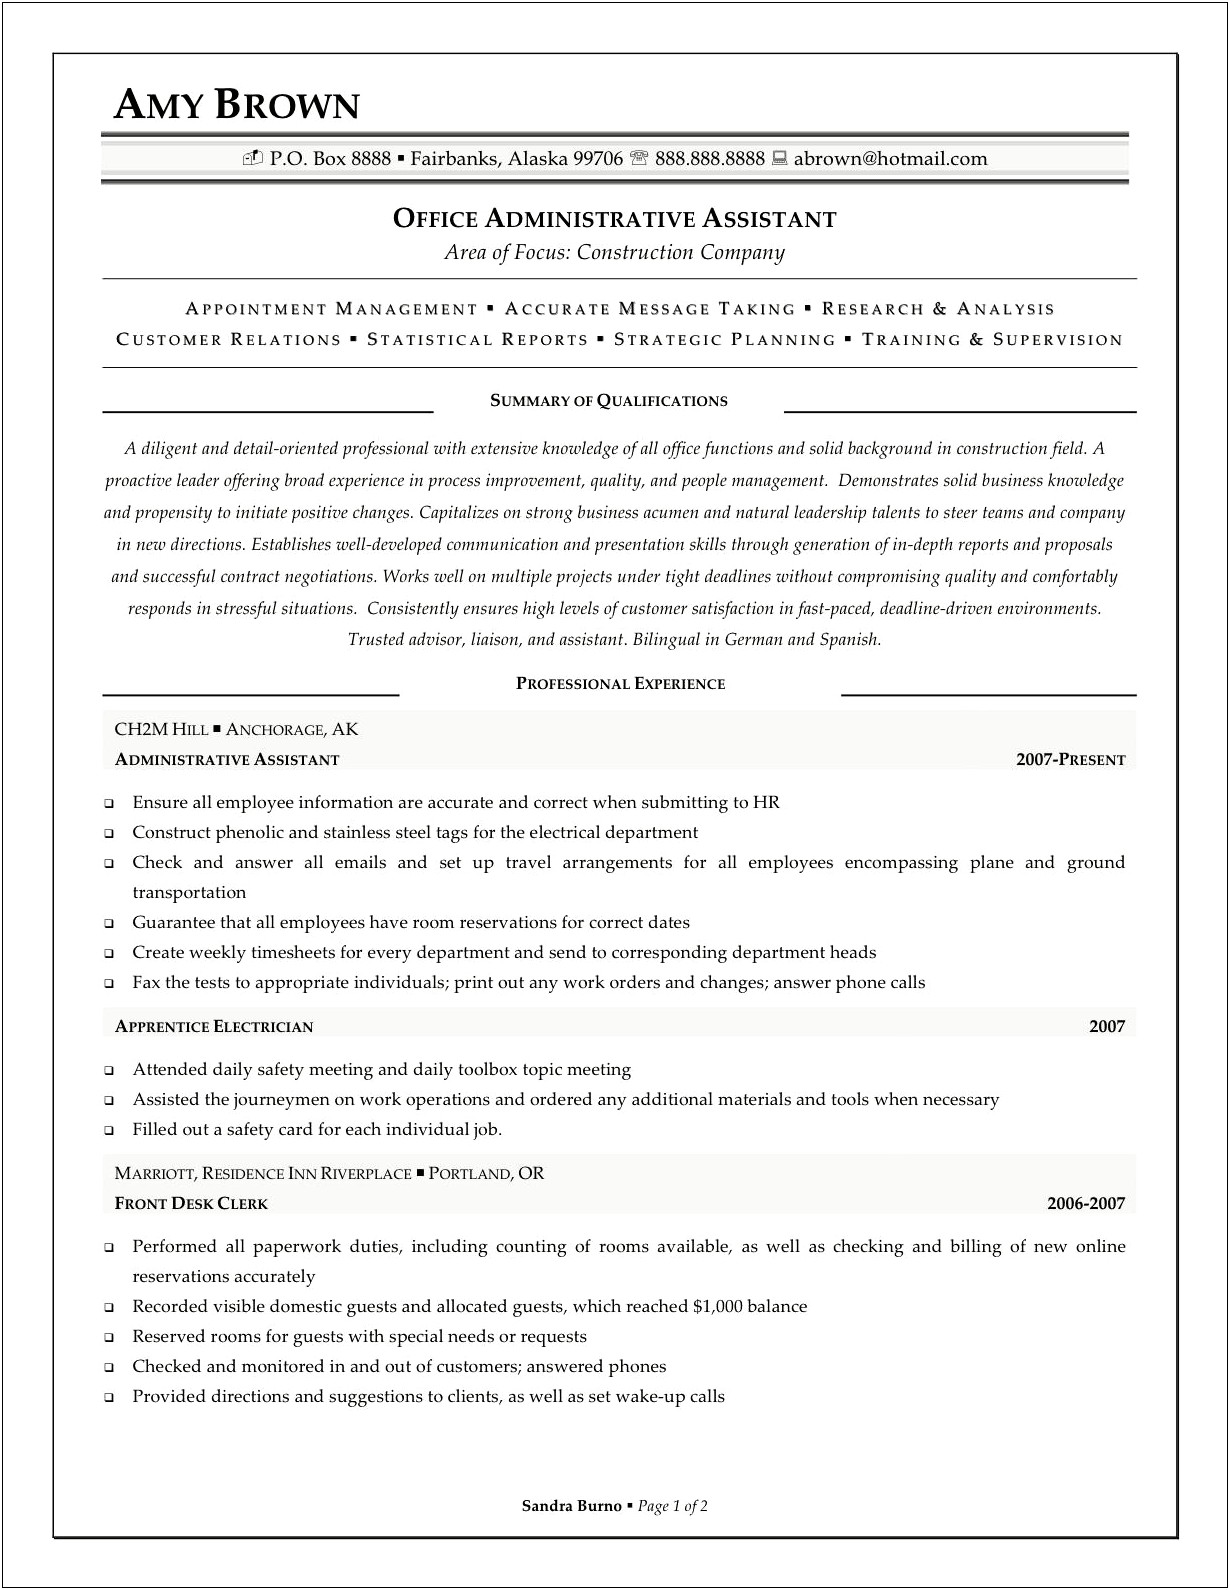 Resume Summary Statement For Executive Administrative Assistant